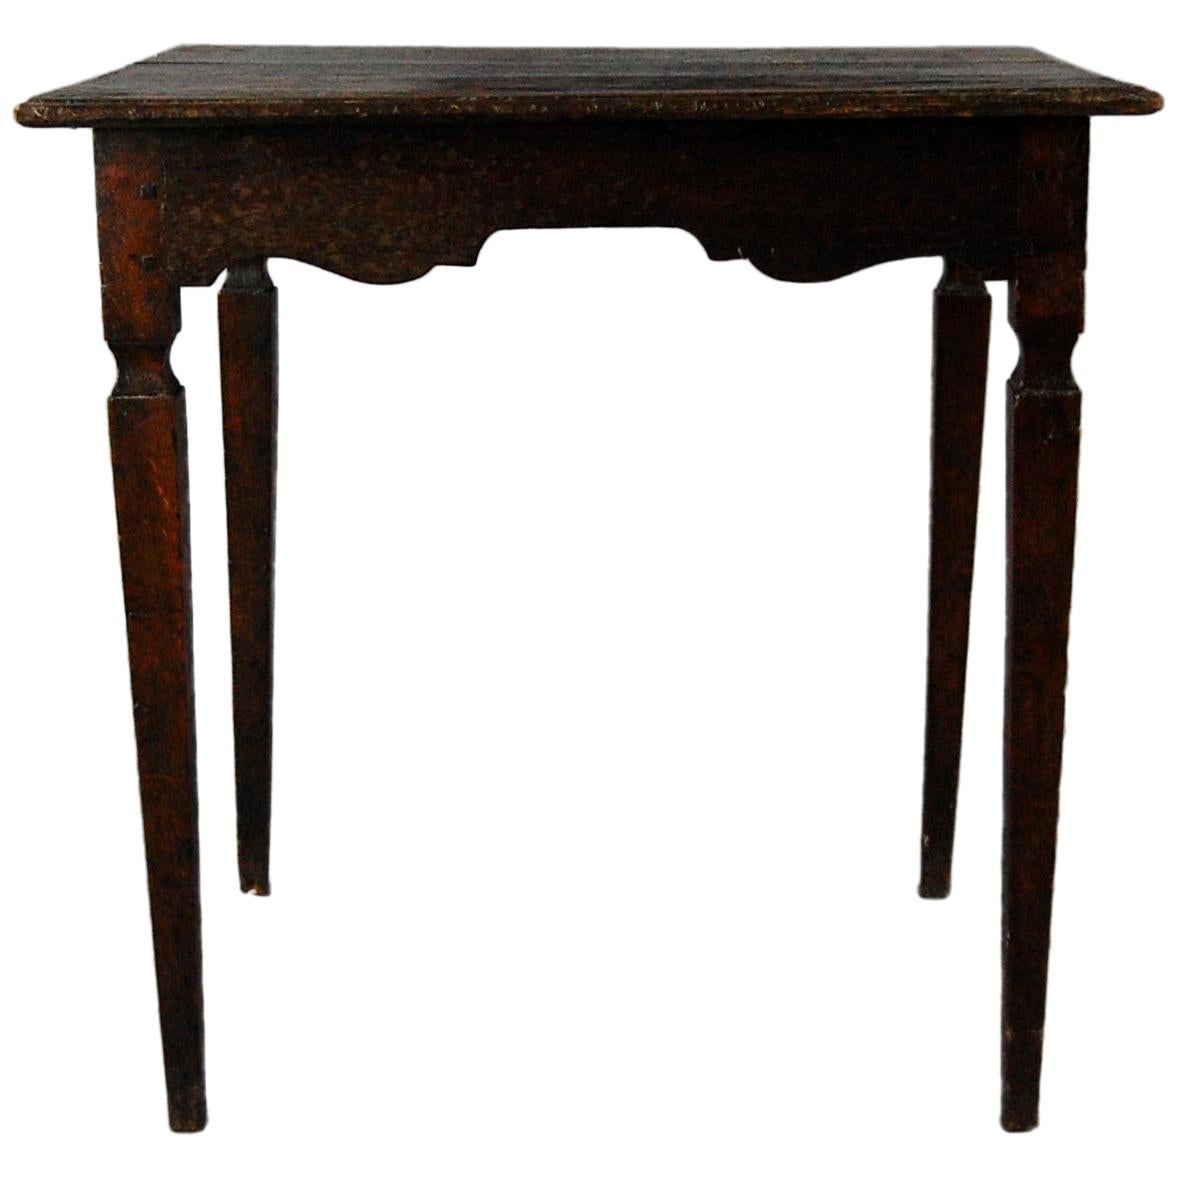 Late 18th Century French Louis XVI Table